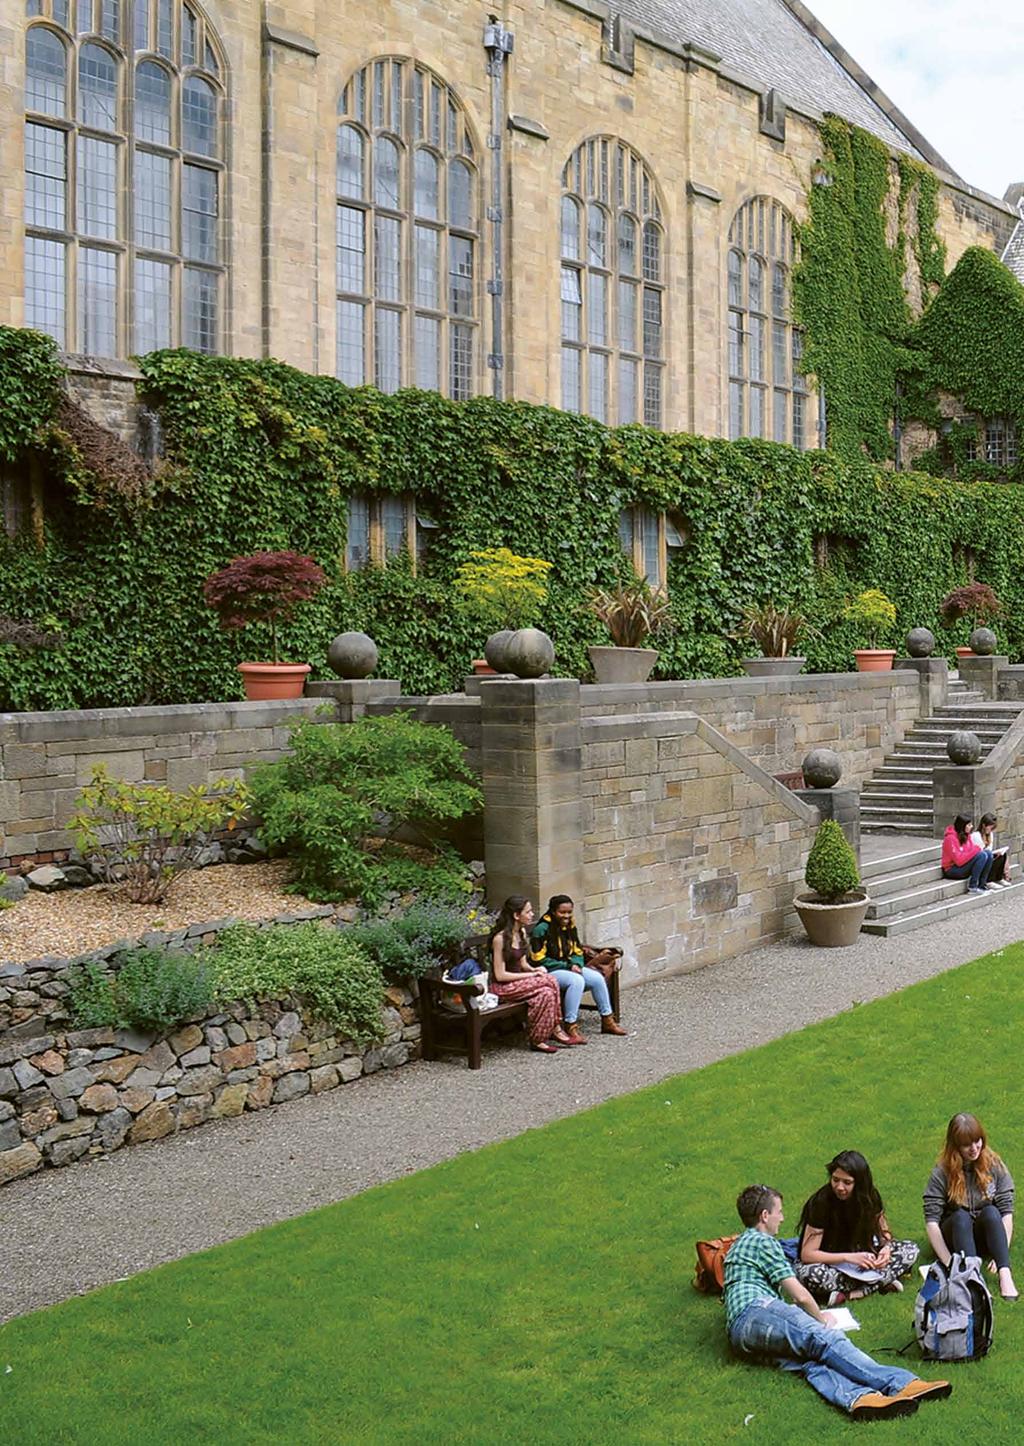 Bangor International College is operated by Oxford International Education Group in partnership with Bangor University.